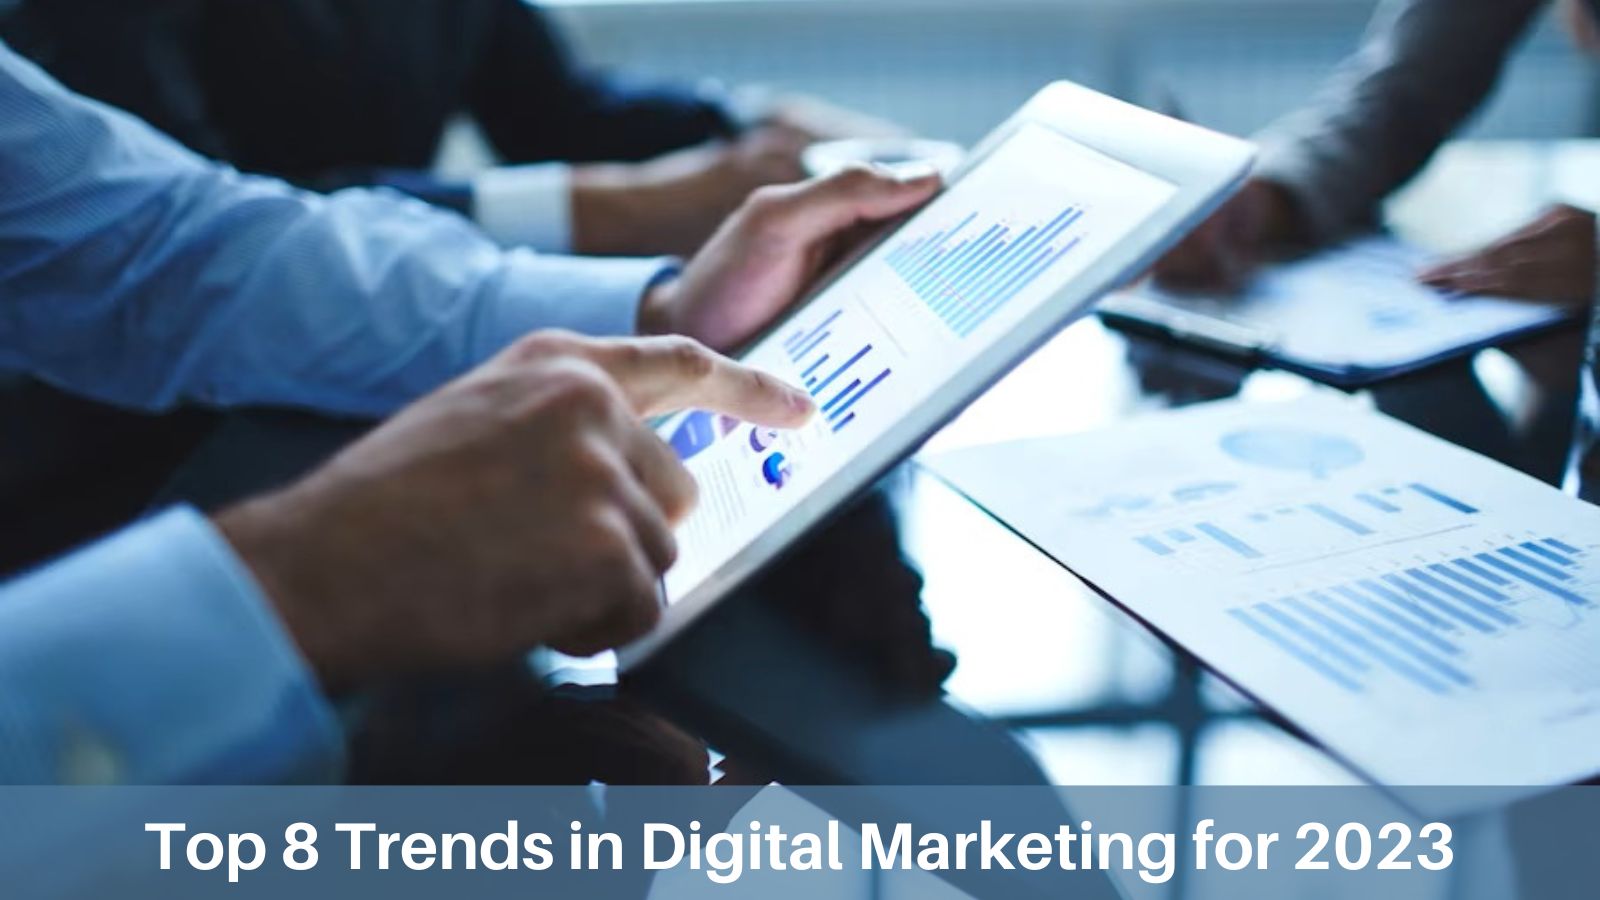 Top 8 trends in digital marketing for 2023